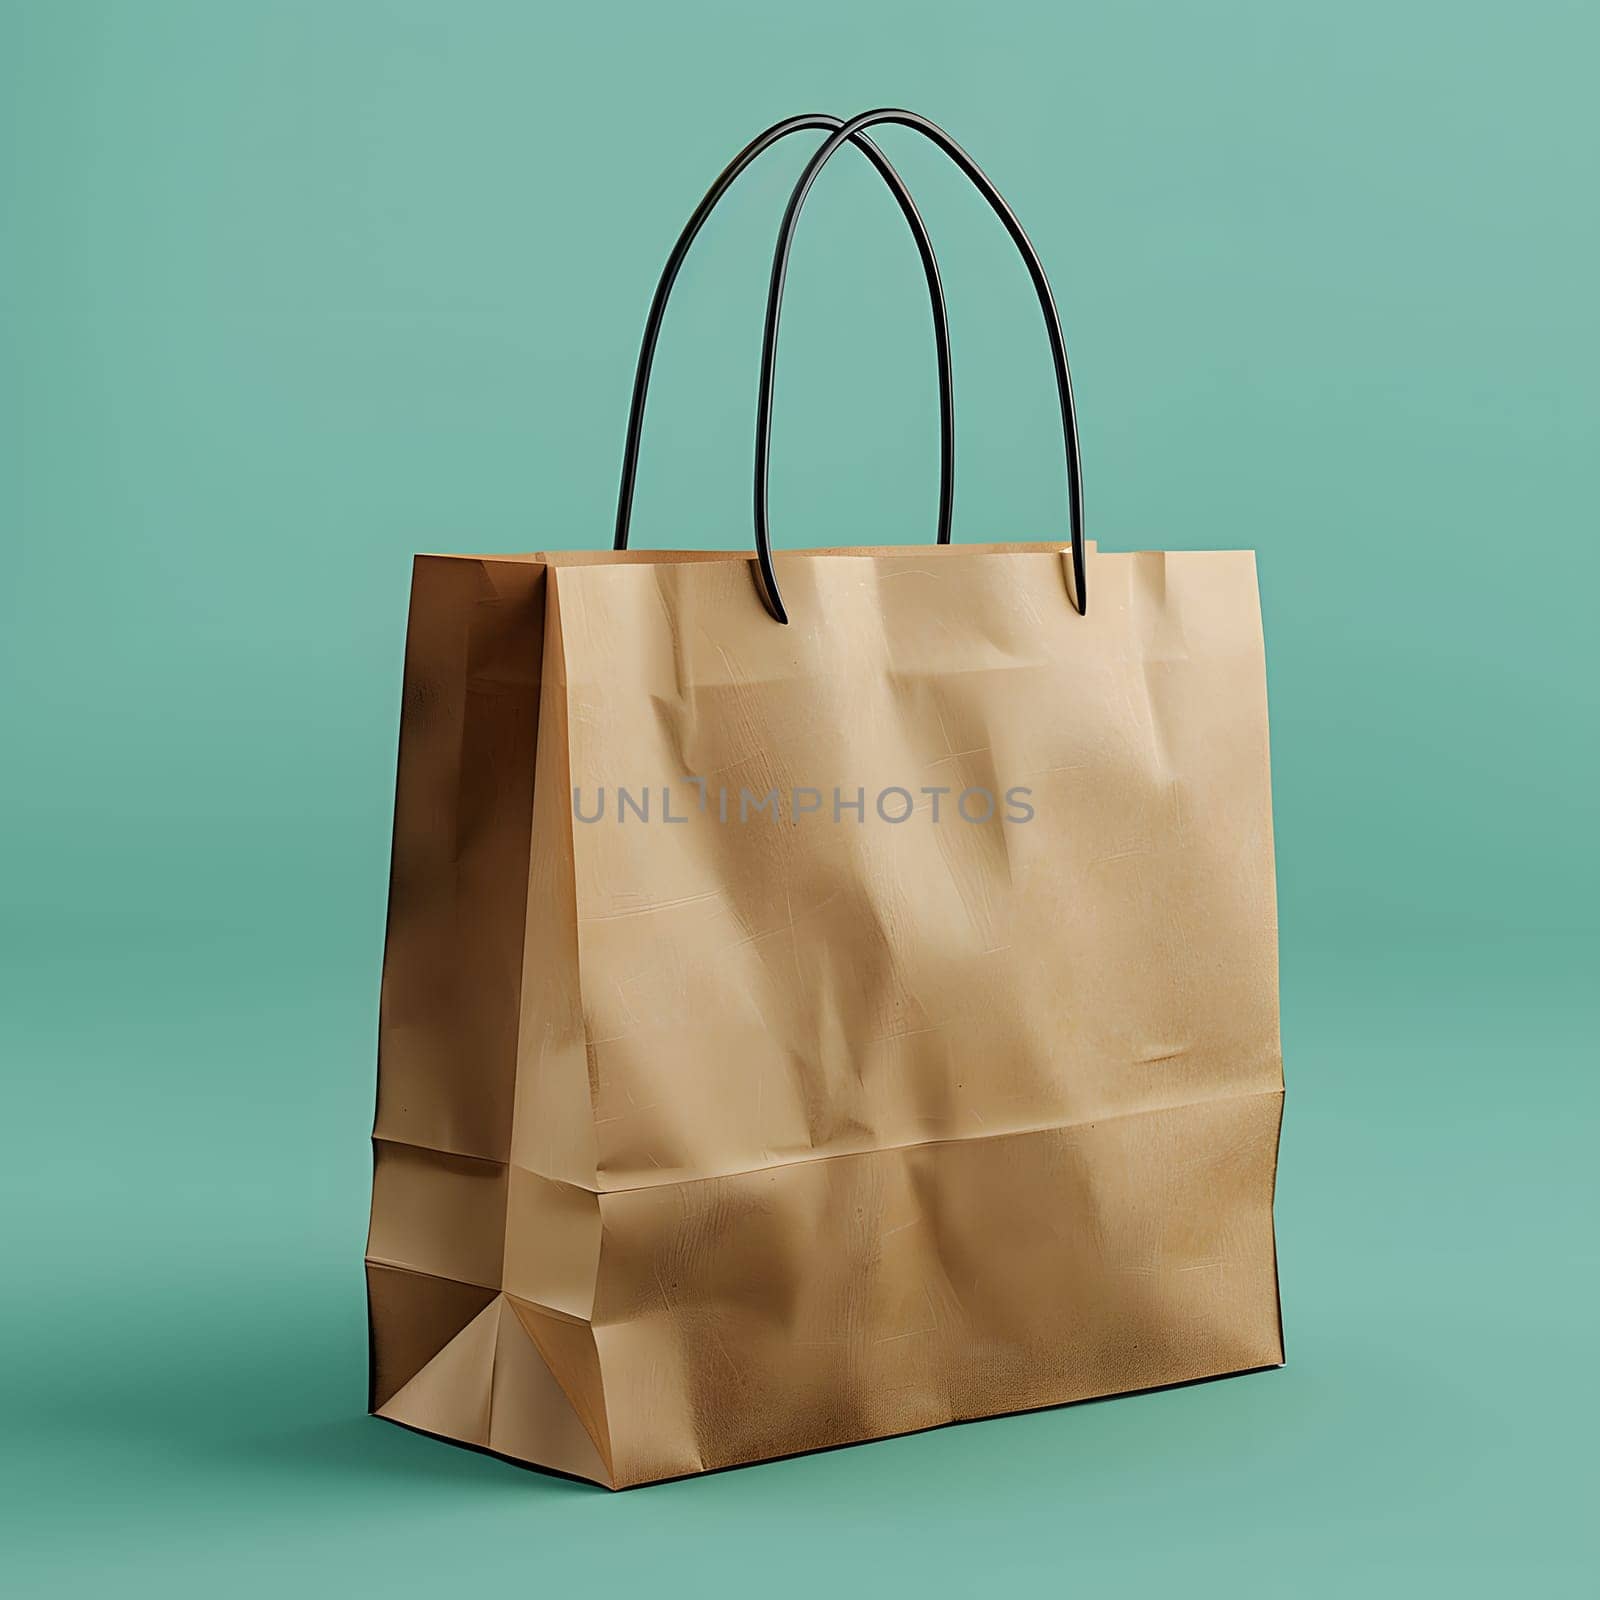 A stylish rectangle beige paper bag with black handles is resting on a green surface, showcasing its creative arts design as a fashion accessory